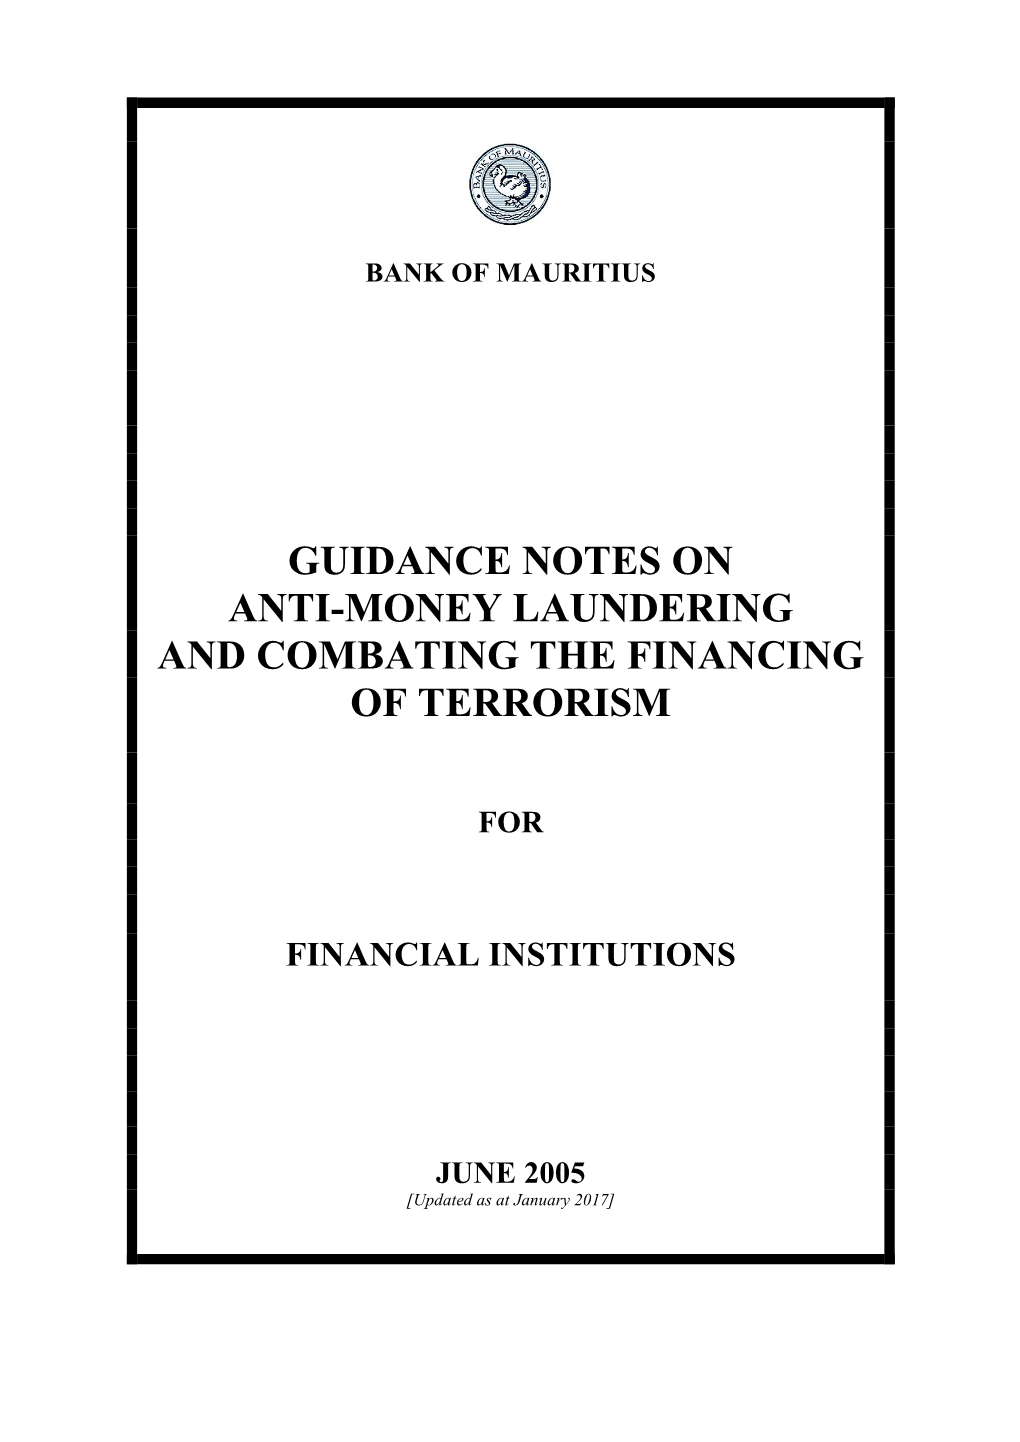 Guidance Notes on Anti-Money Laundering and Combating the Financing of Terrorism